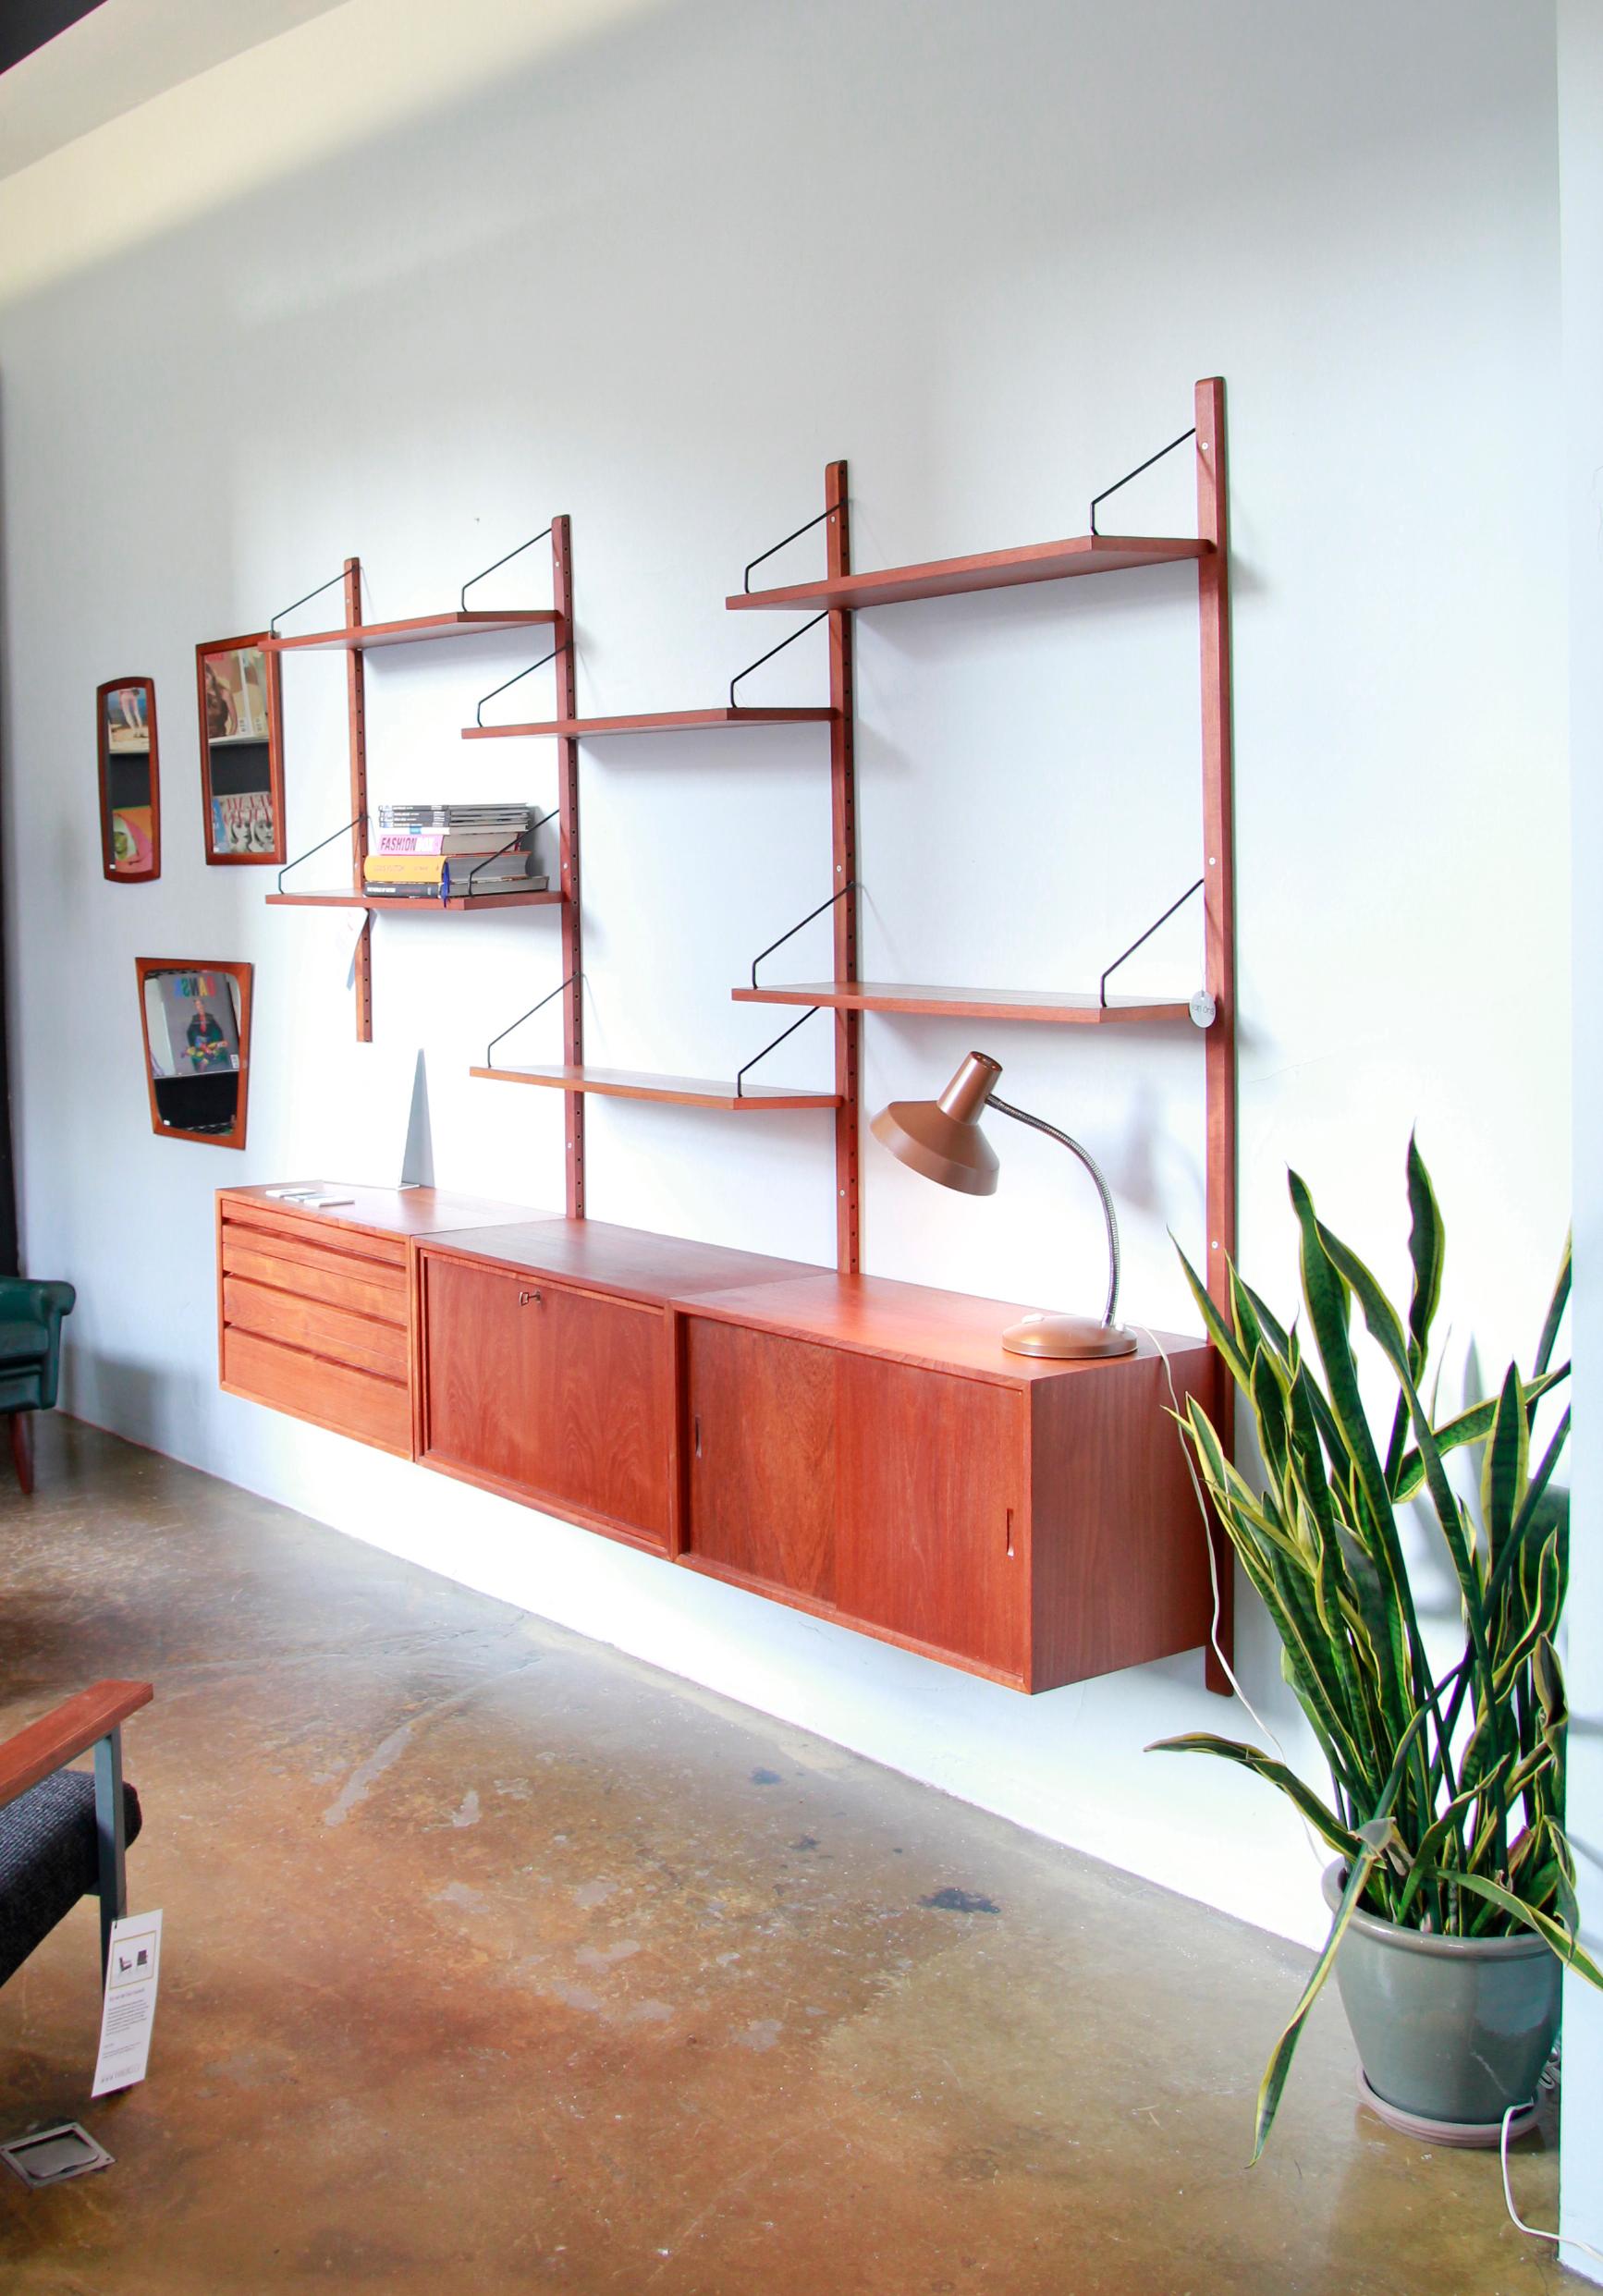 Danish Teak Poul Cadovius Hanging Wall System by Royal System Denmark, 1960s